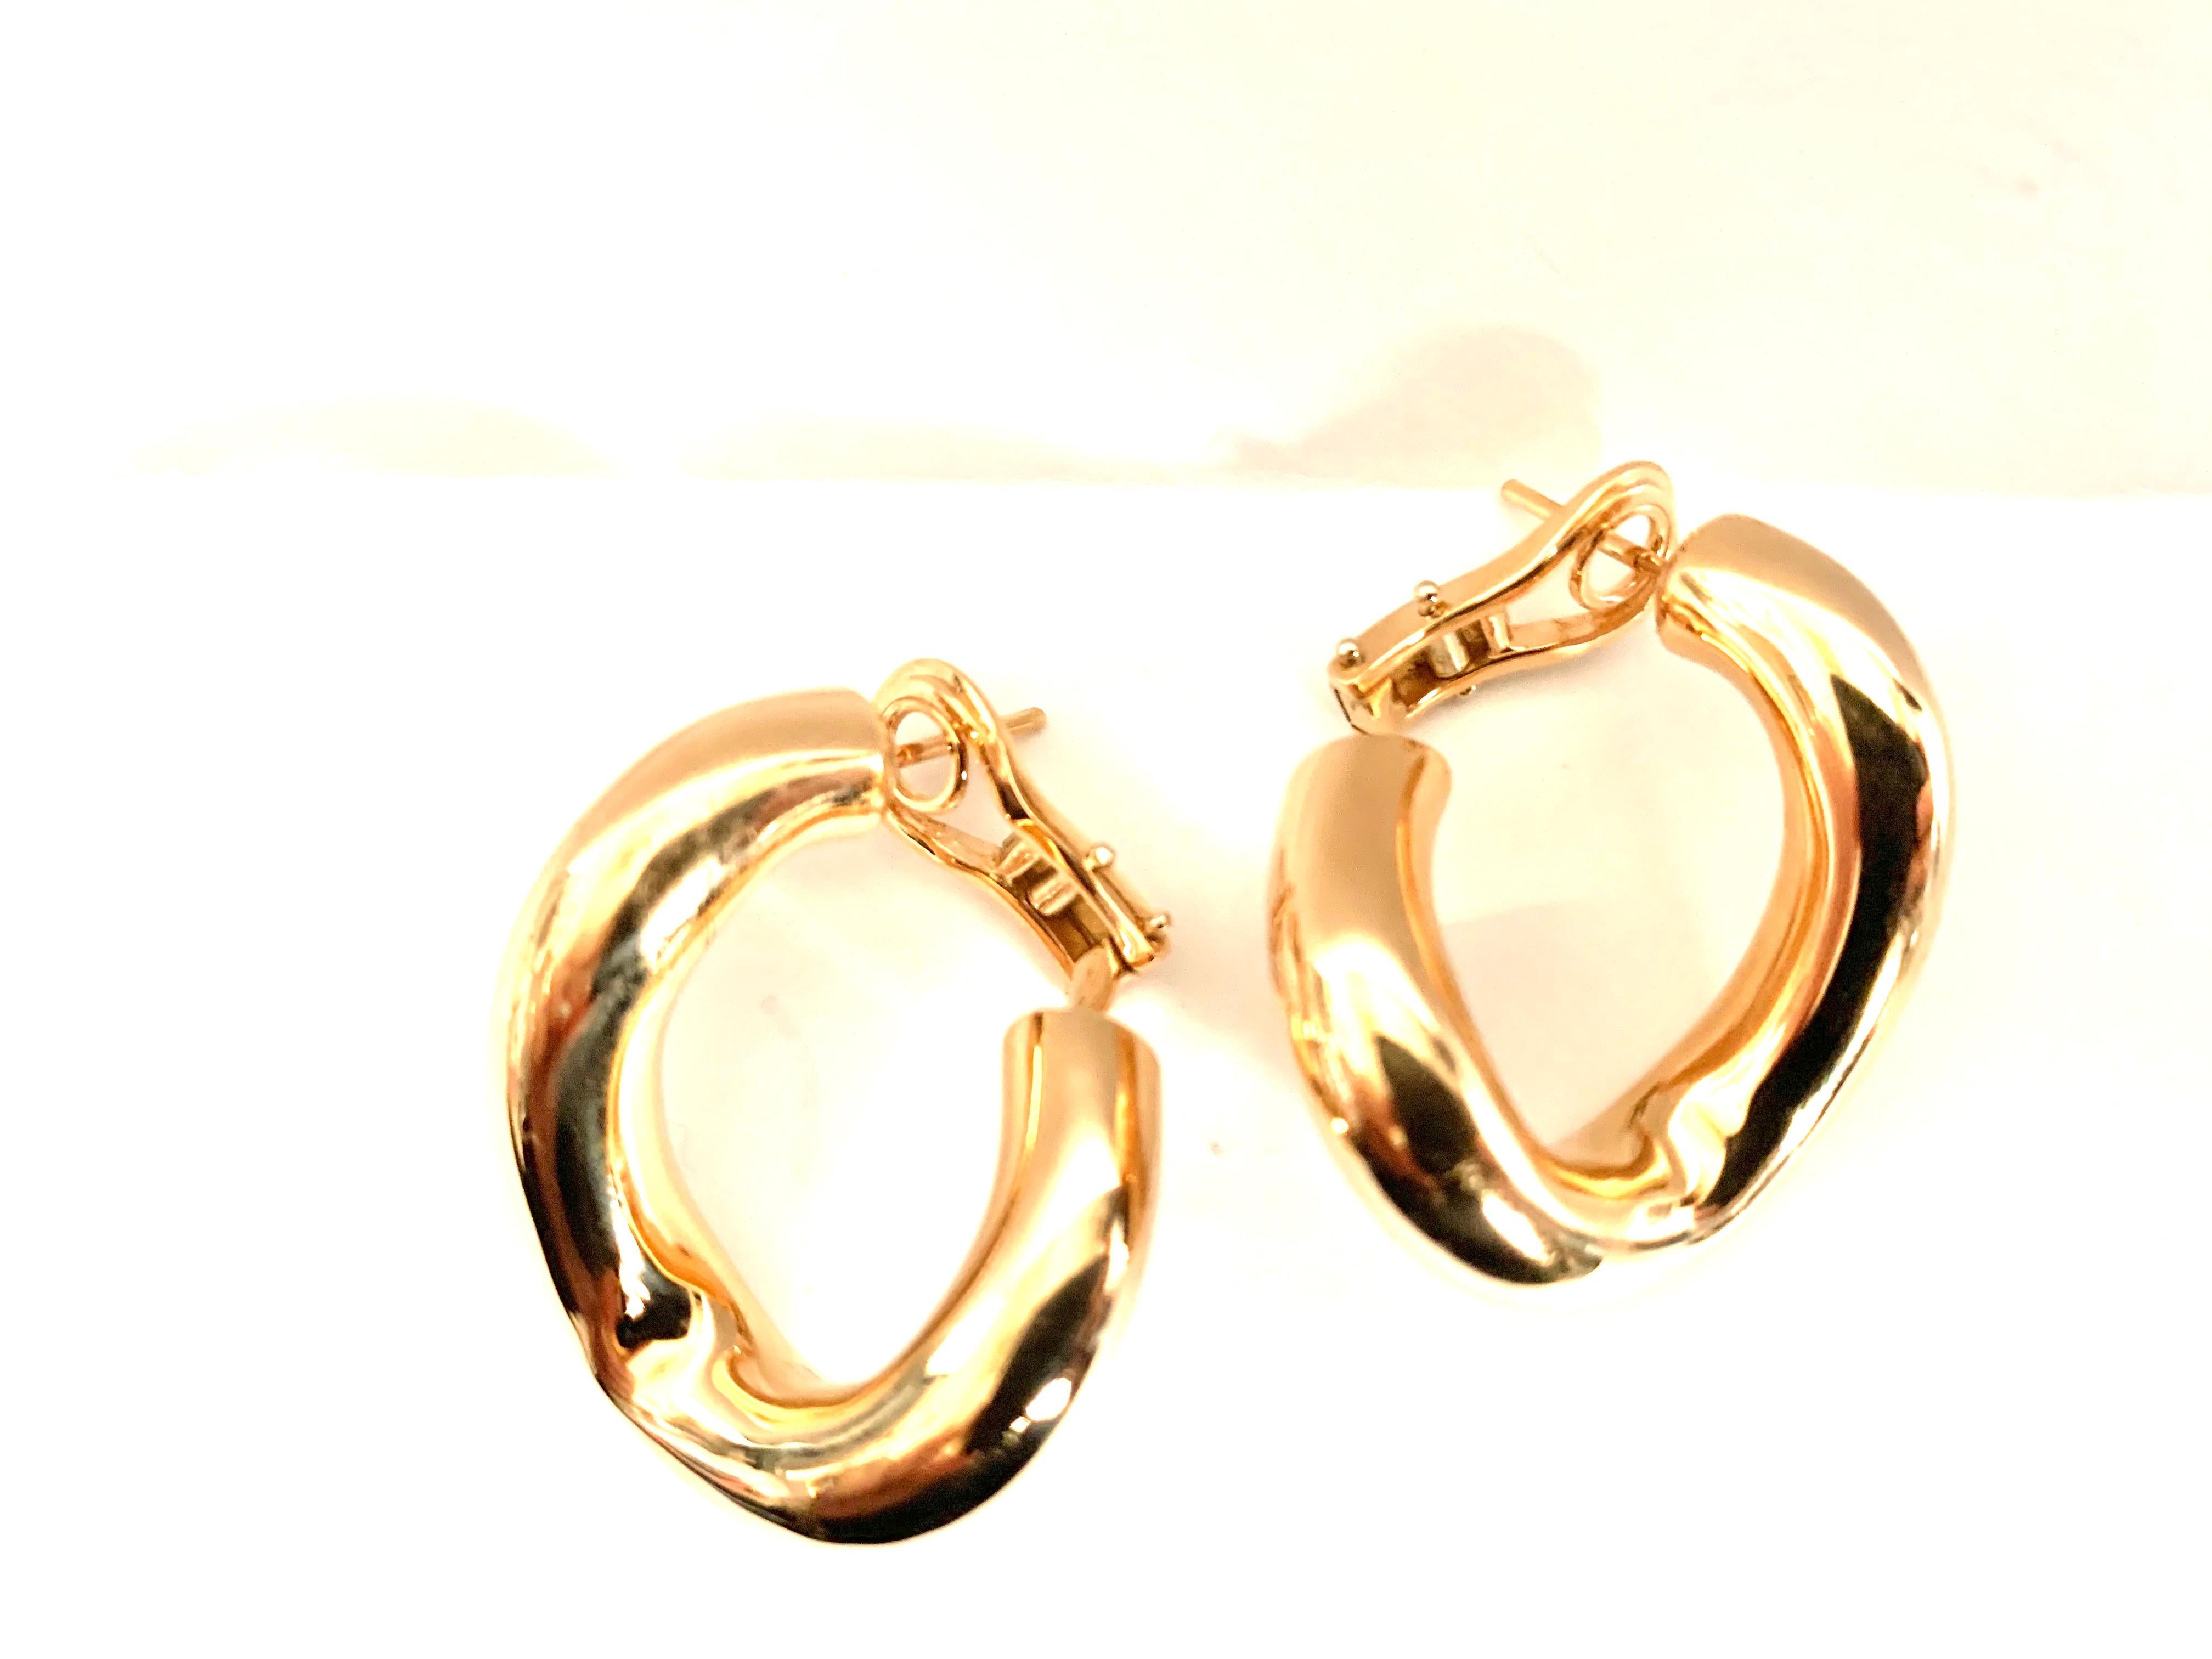 Classic groumette pair of earrings in 18 kt rose gold 
This is the iconic collection in Micheletto.

the total weight of the gold is 13.30

STAMP: 10 MI ITALY 750

The full set is available.
The bracelet can be locked togheter to make the necklace